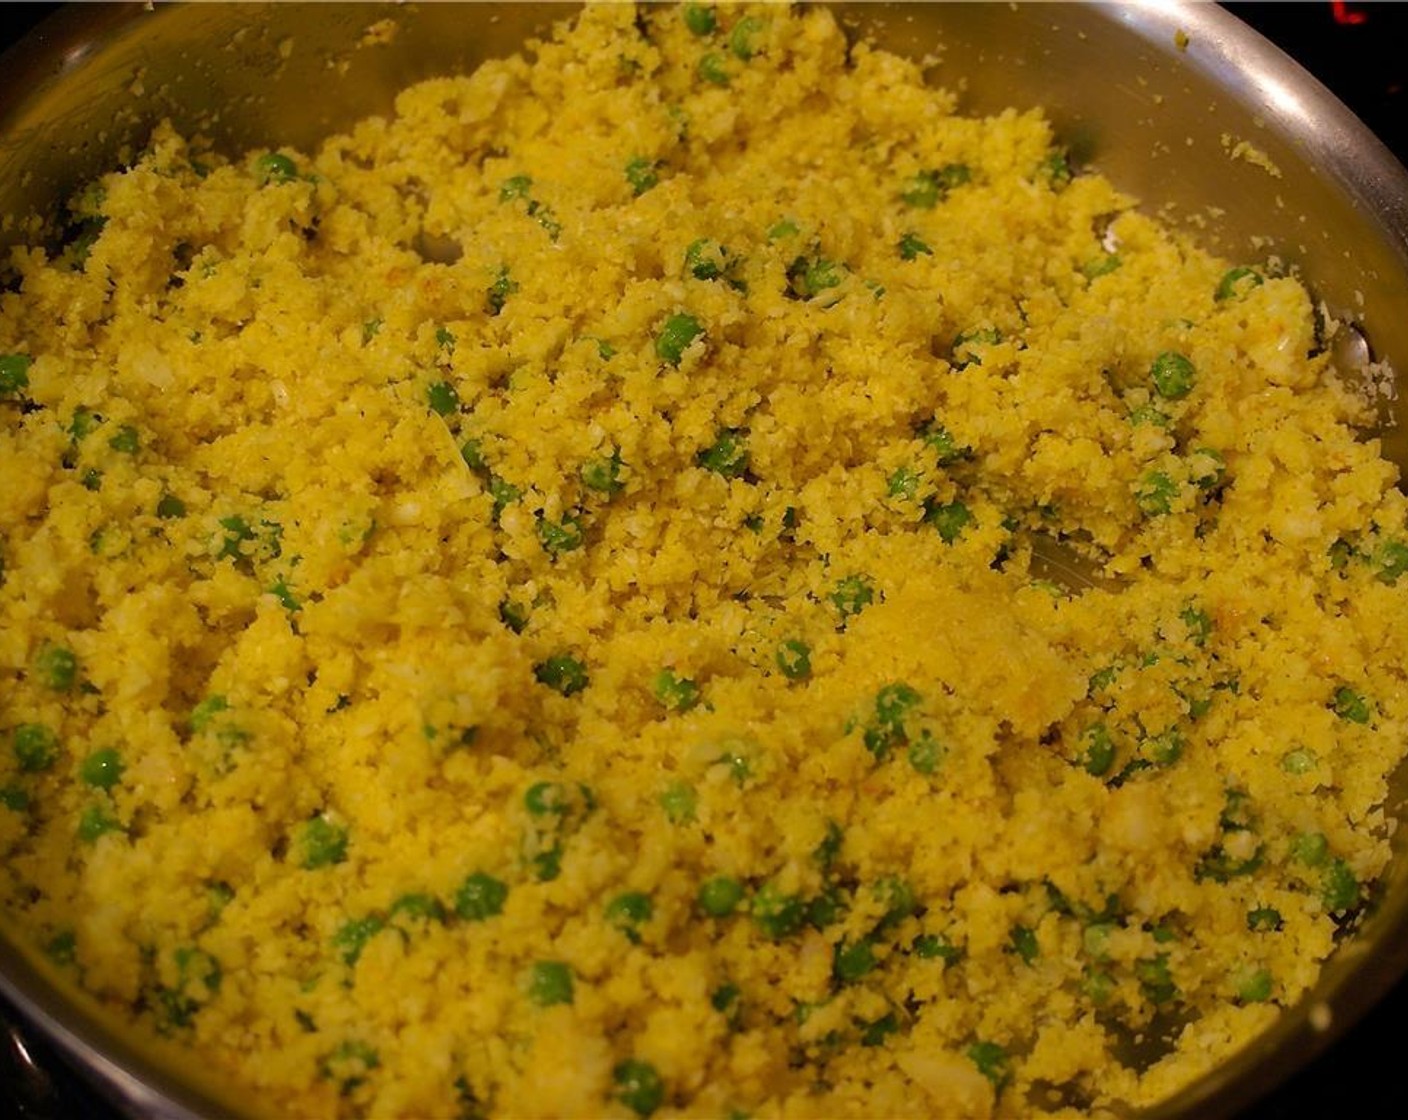 step 6 Add Ground Turmeric (1/2 tsp), Green Peas (1 cup), and 2 tsp zest from the Lemon (1), stirring well. When the peas are heated through, remove from the heat.